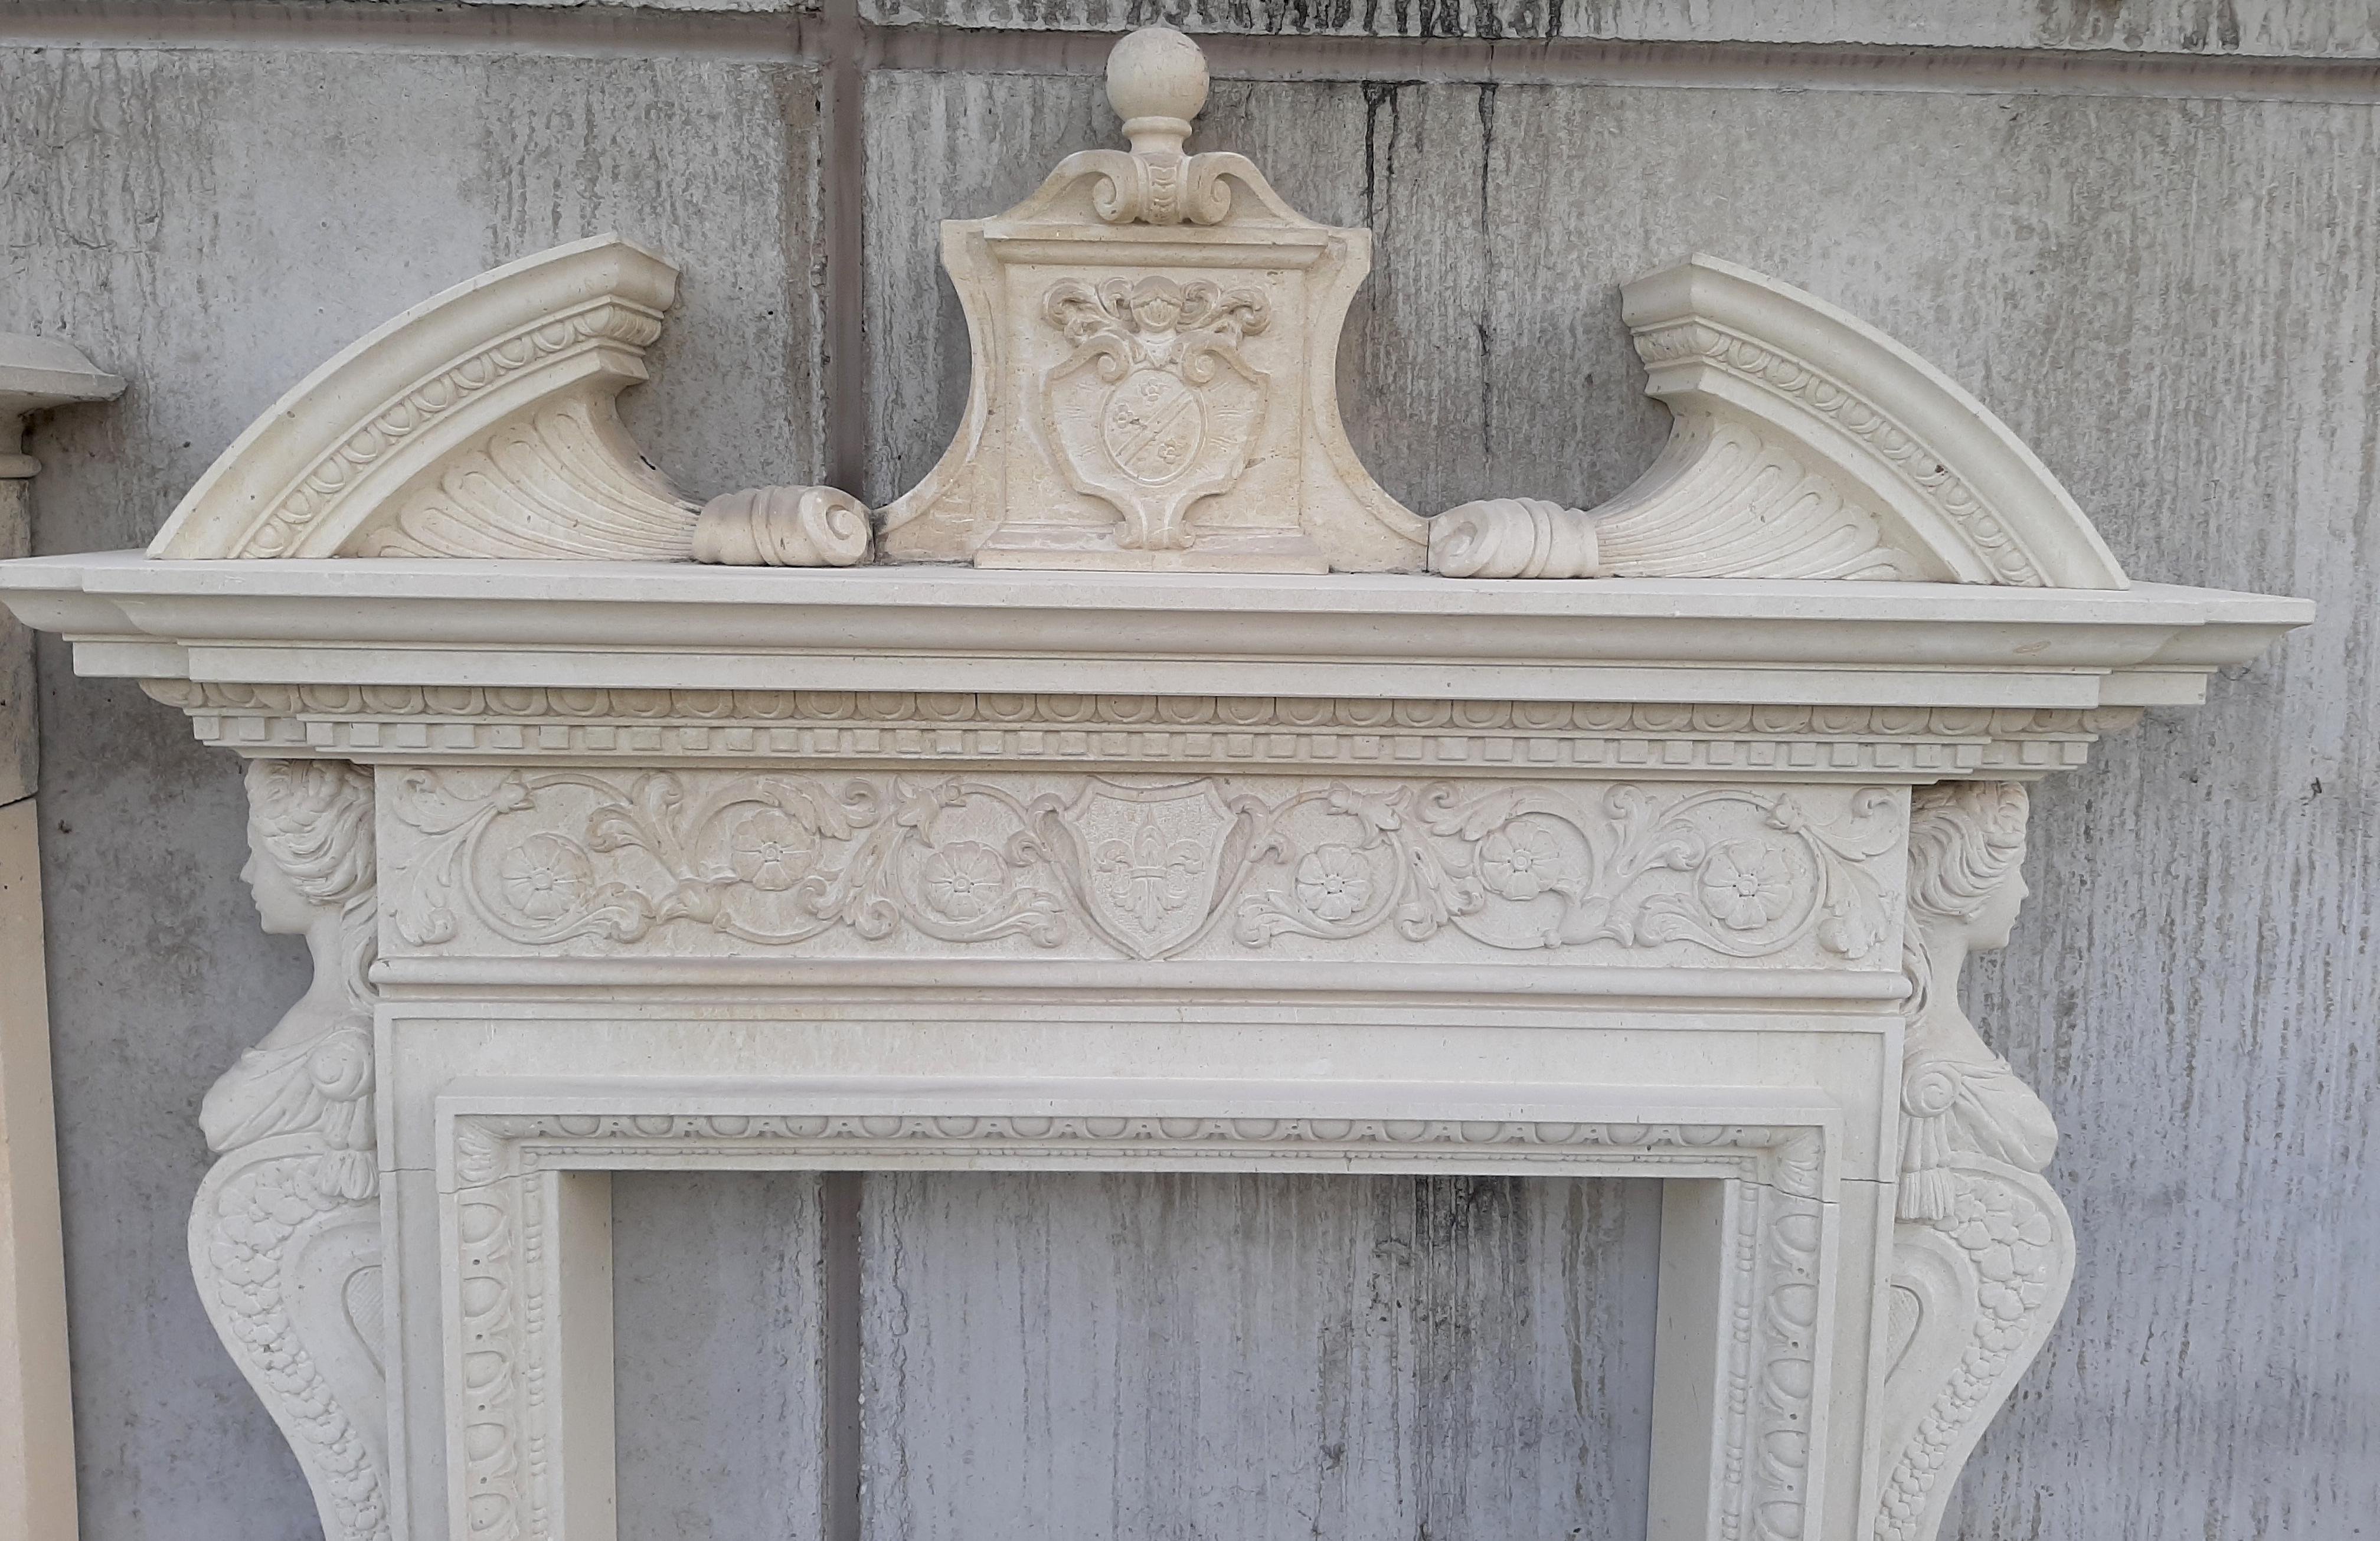 A finely carved Italian limestone fireplace with female caryatid figures and shaped frieze with elegant acanthus leaves decoration.

 This item can be disassembled and the elements individually wrapped for easy transport. We will deliver